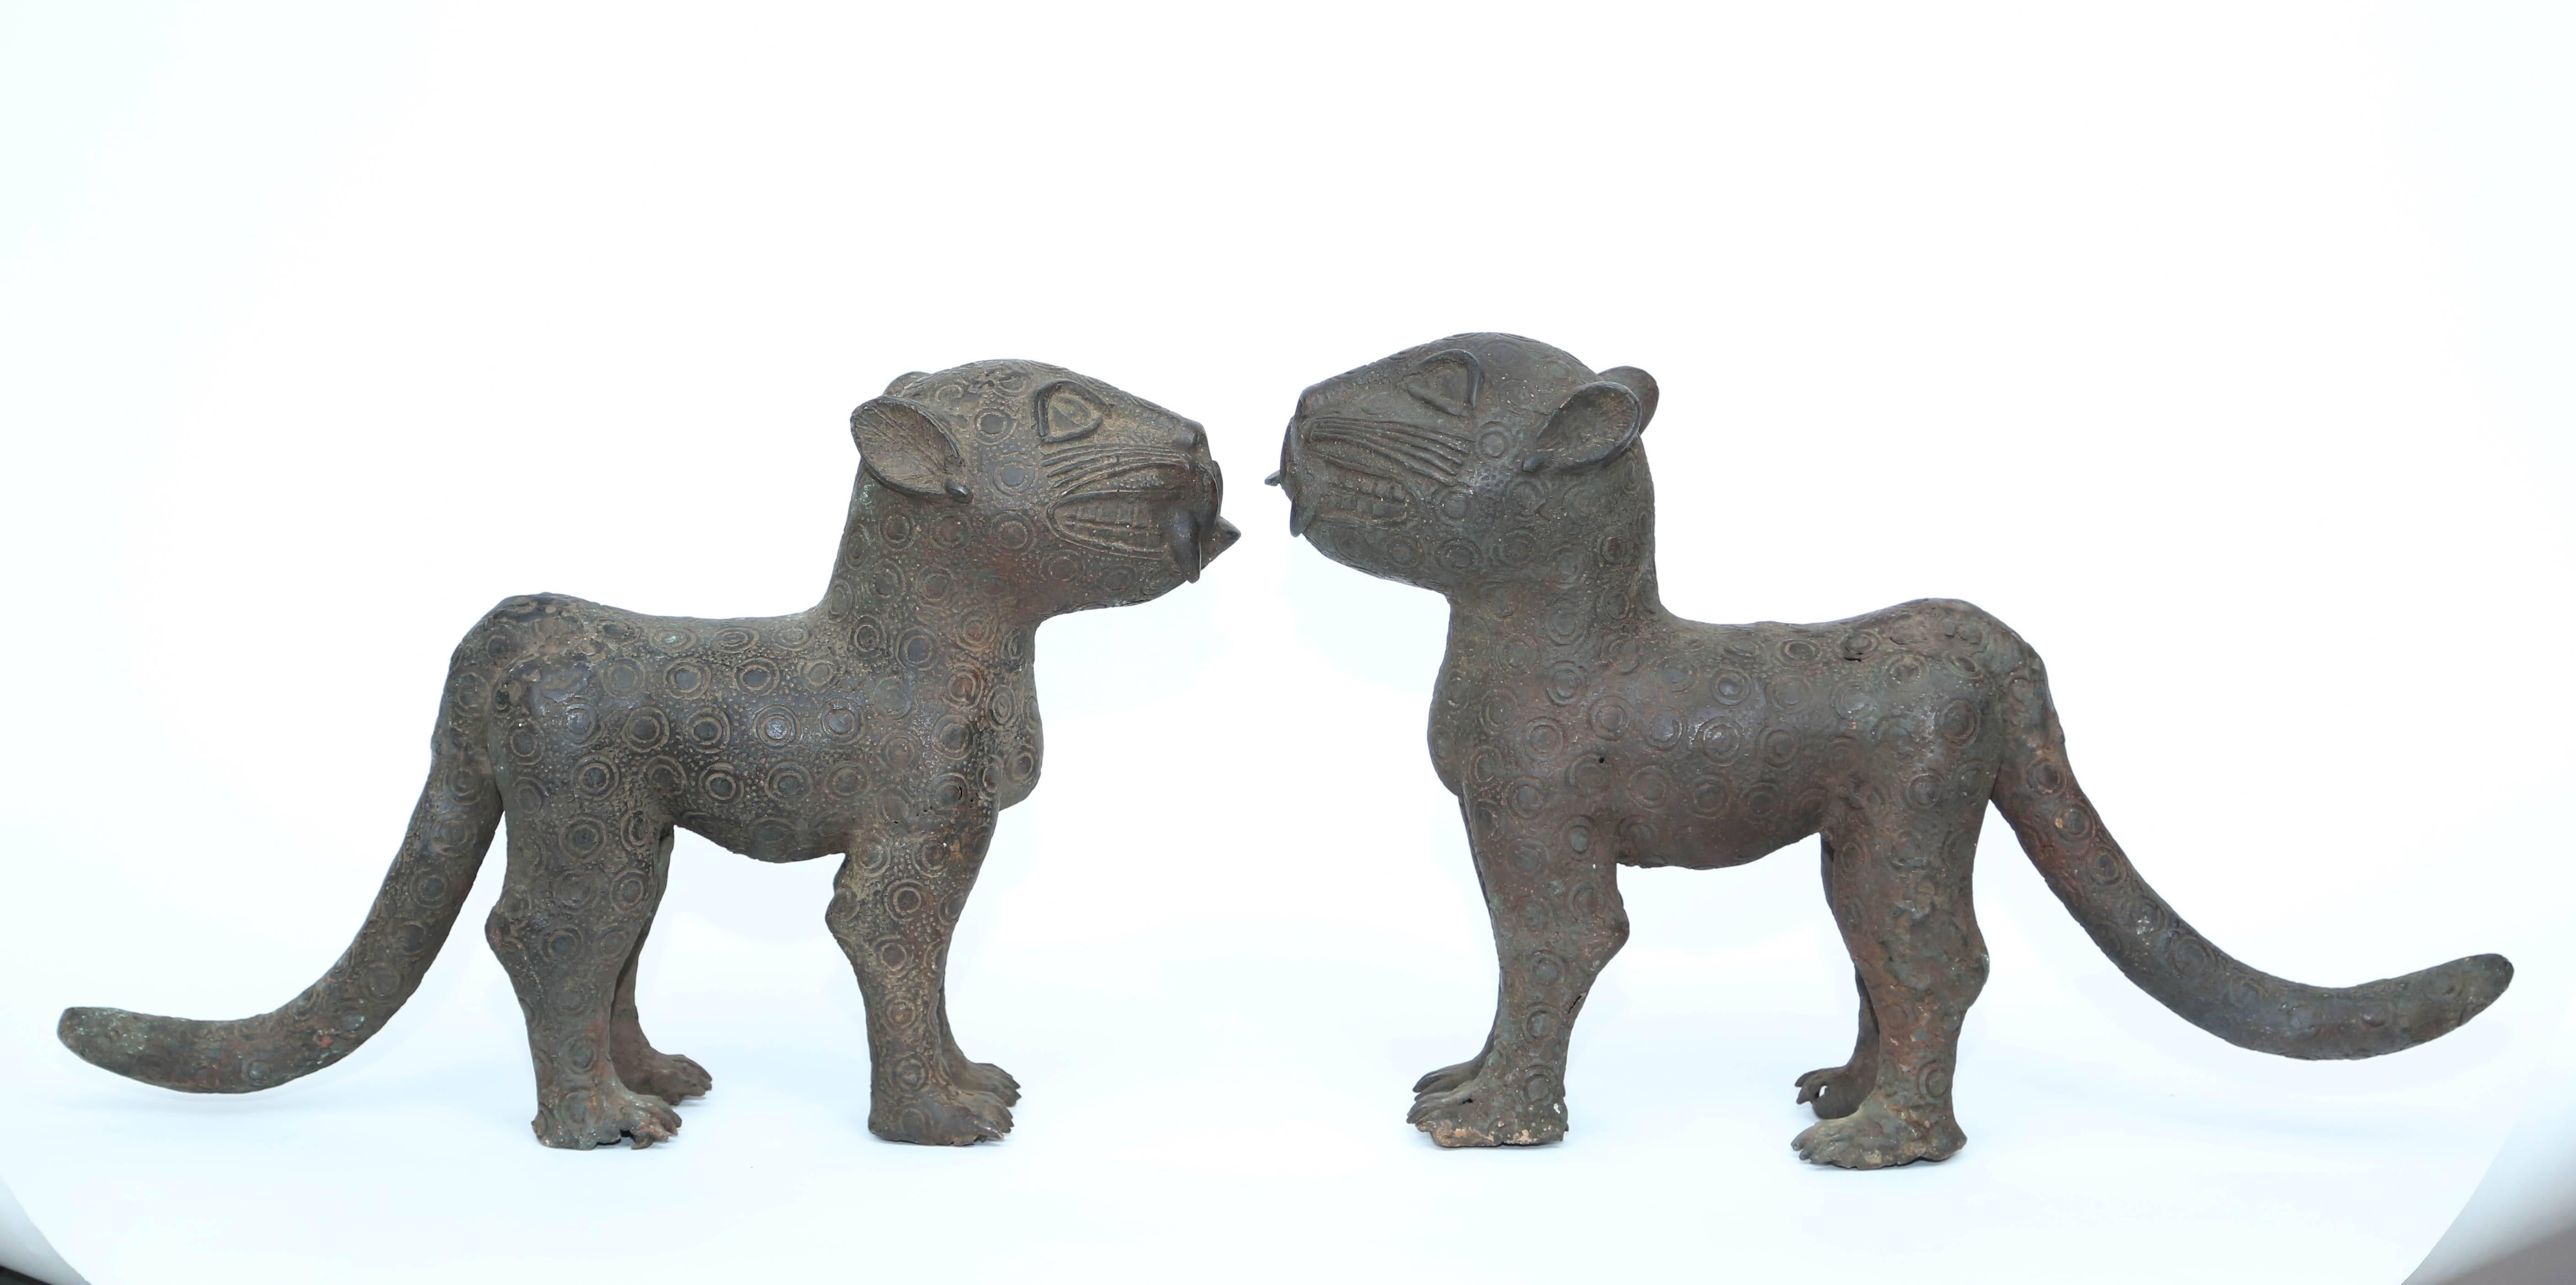 These lions, male and female are most charming, will add a sophisticated look to any room
we have seen the large versions over the years, bur never theses charming animals
female is a bid smaller.